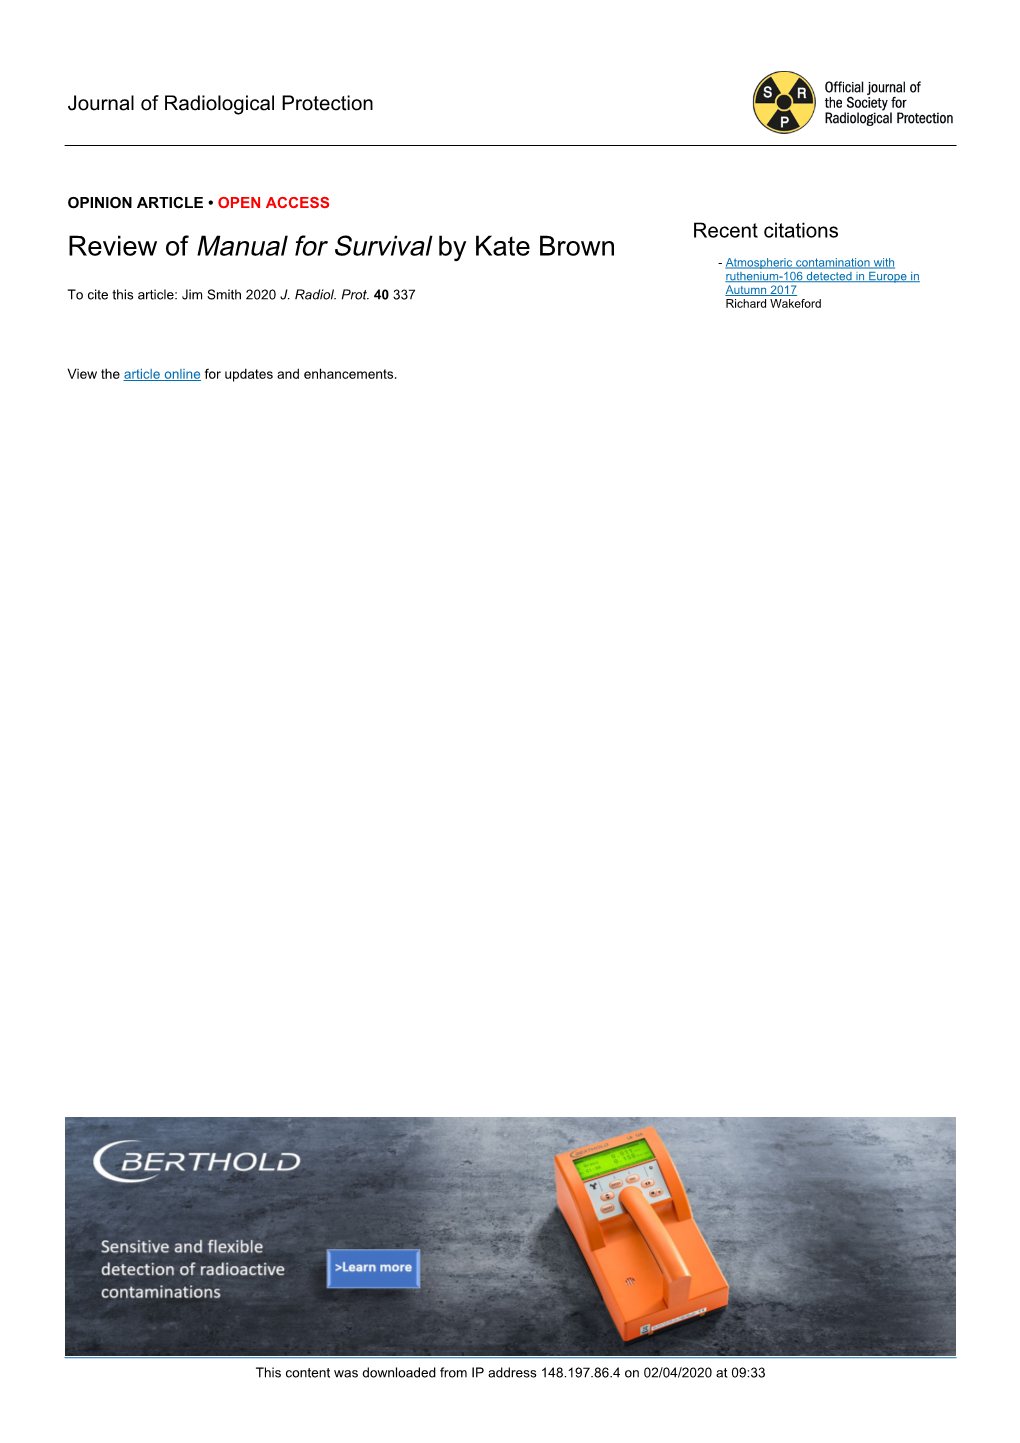 Review of Manual for Survival by Kate Brown - Atmospheric Contamination with Ruthenium-106 Detected in Europe in to Cite This Article: Jim Smith 2020 J